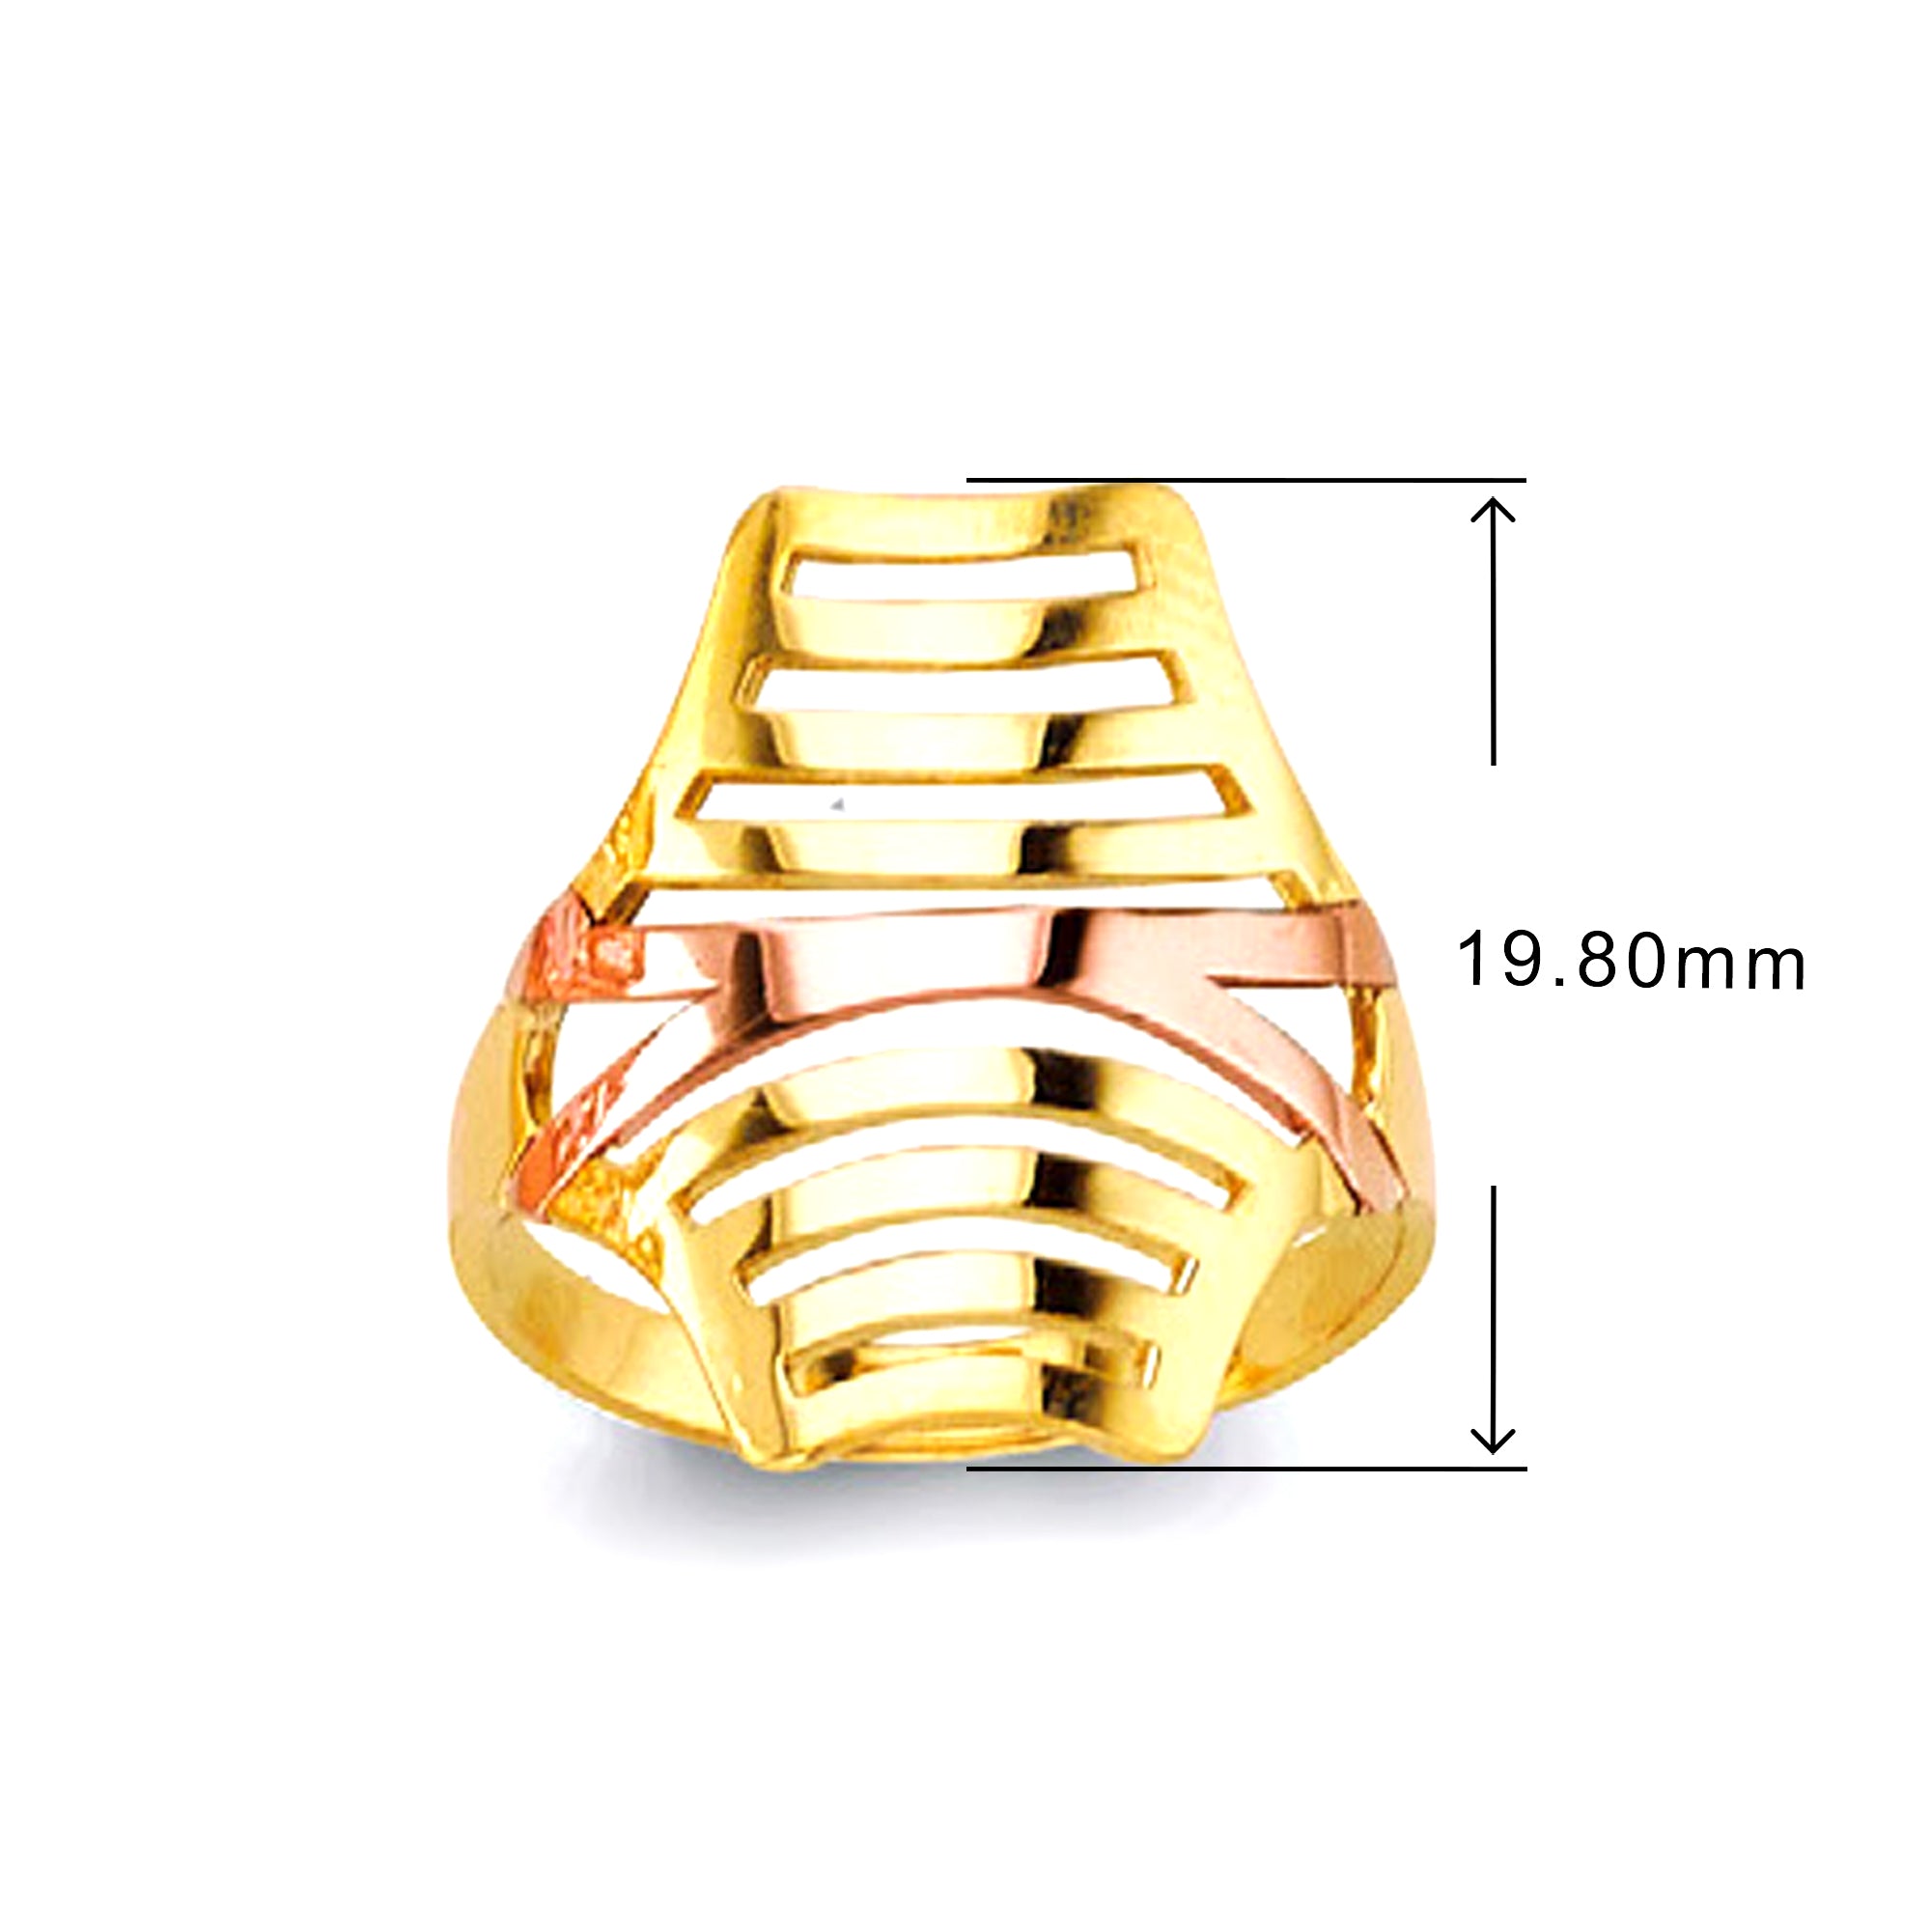 Anomaly Antique Ring in Solid Gold with Measurement